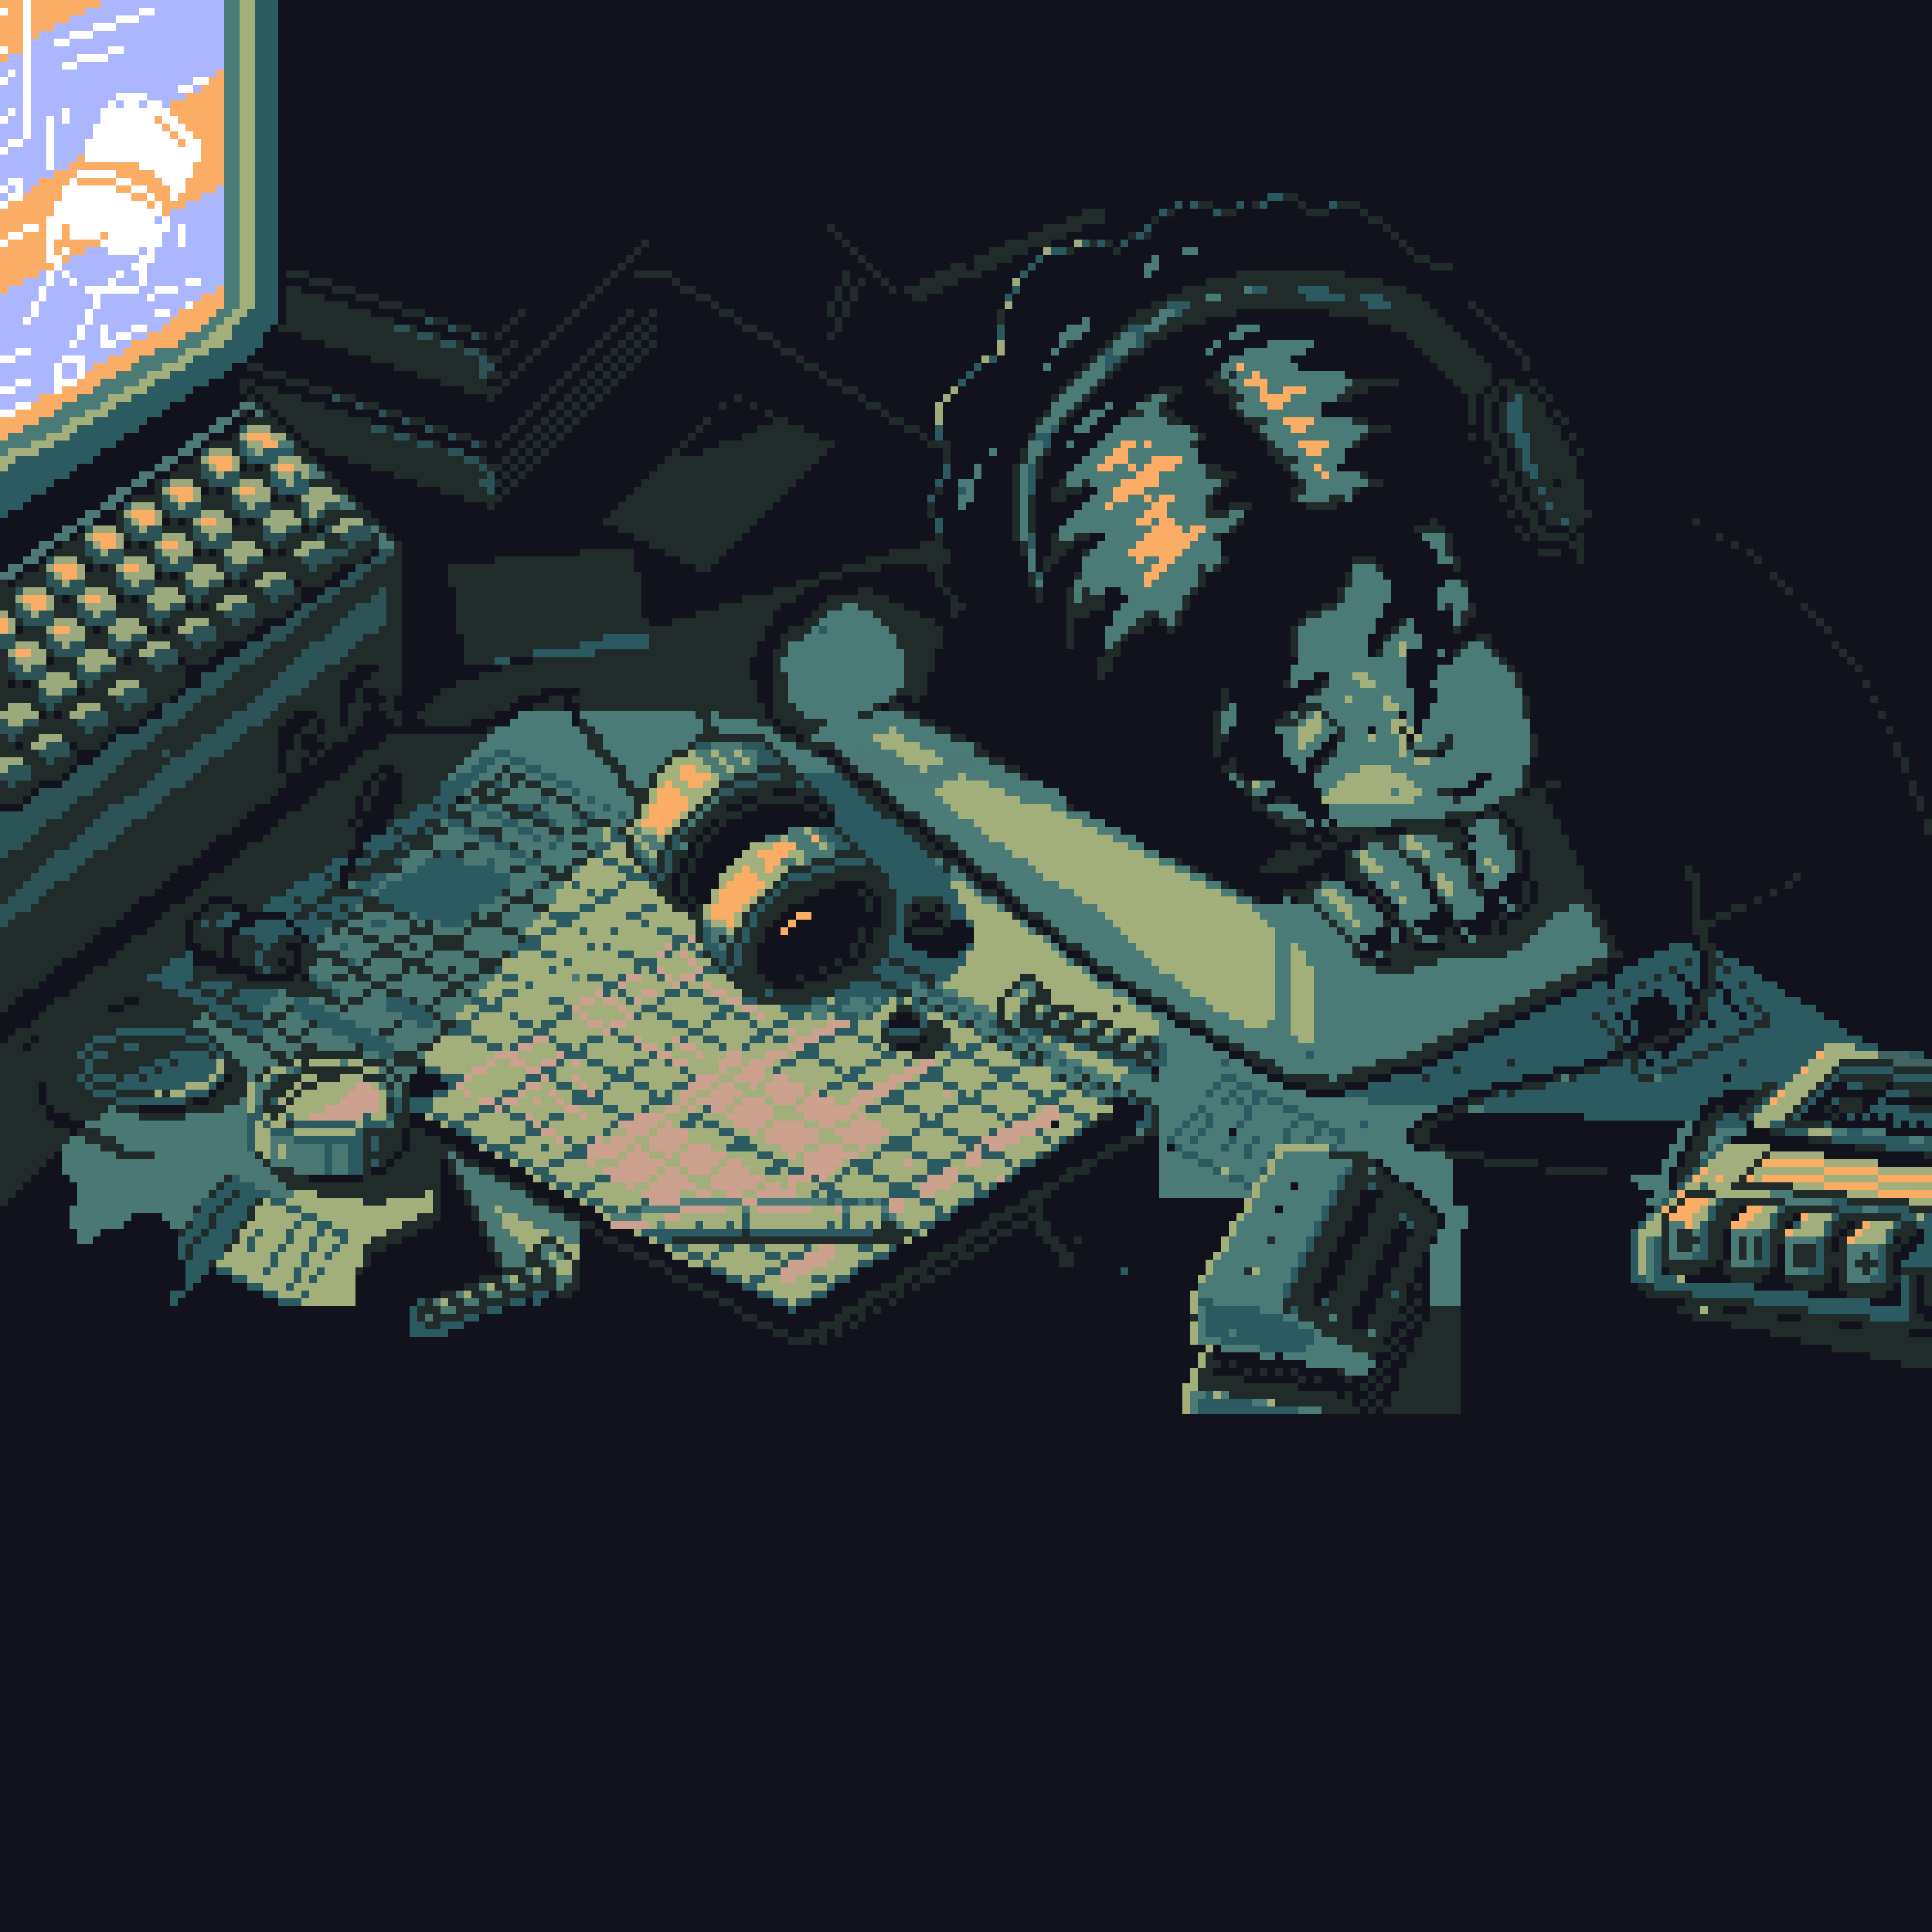 sleep-this-is-probably-my-last-pixel-art-but-unfinished